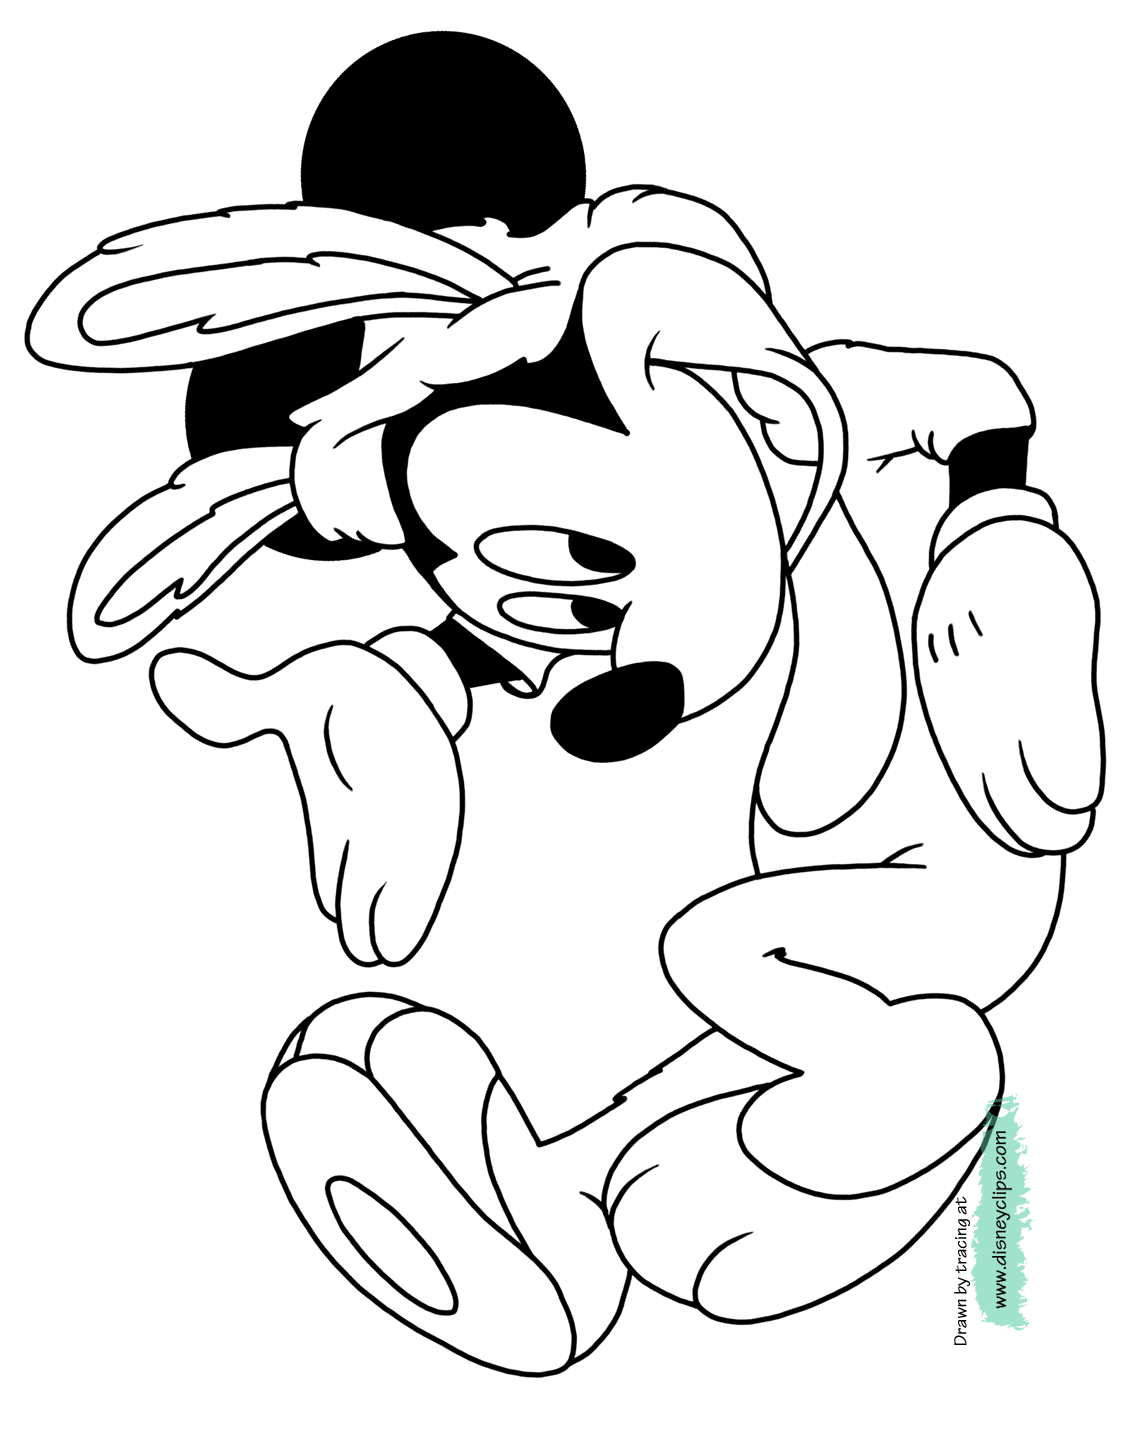 Mickey juggling Easter eggs coloring page Mickey as the Easter bunny